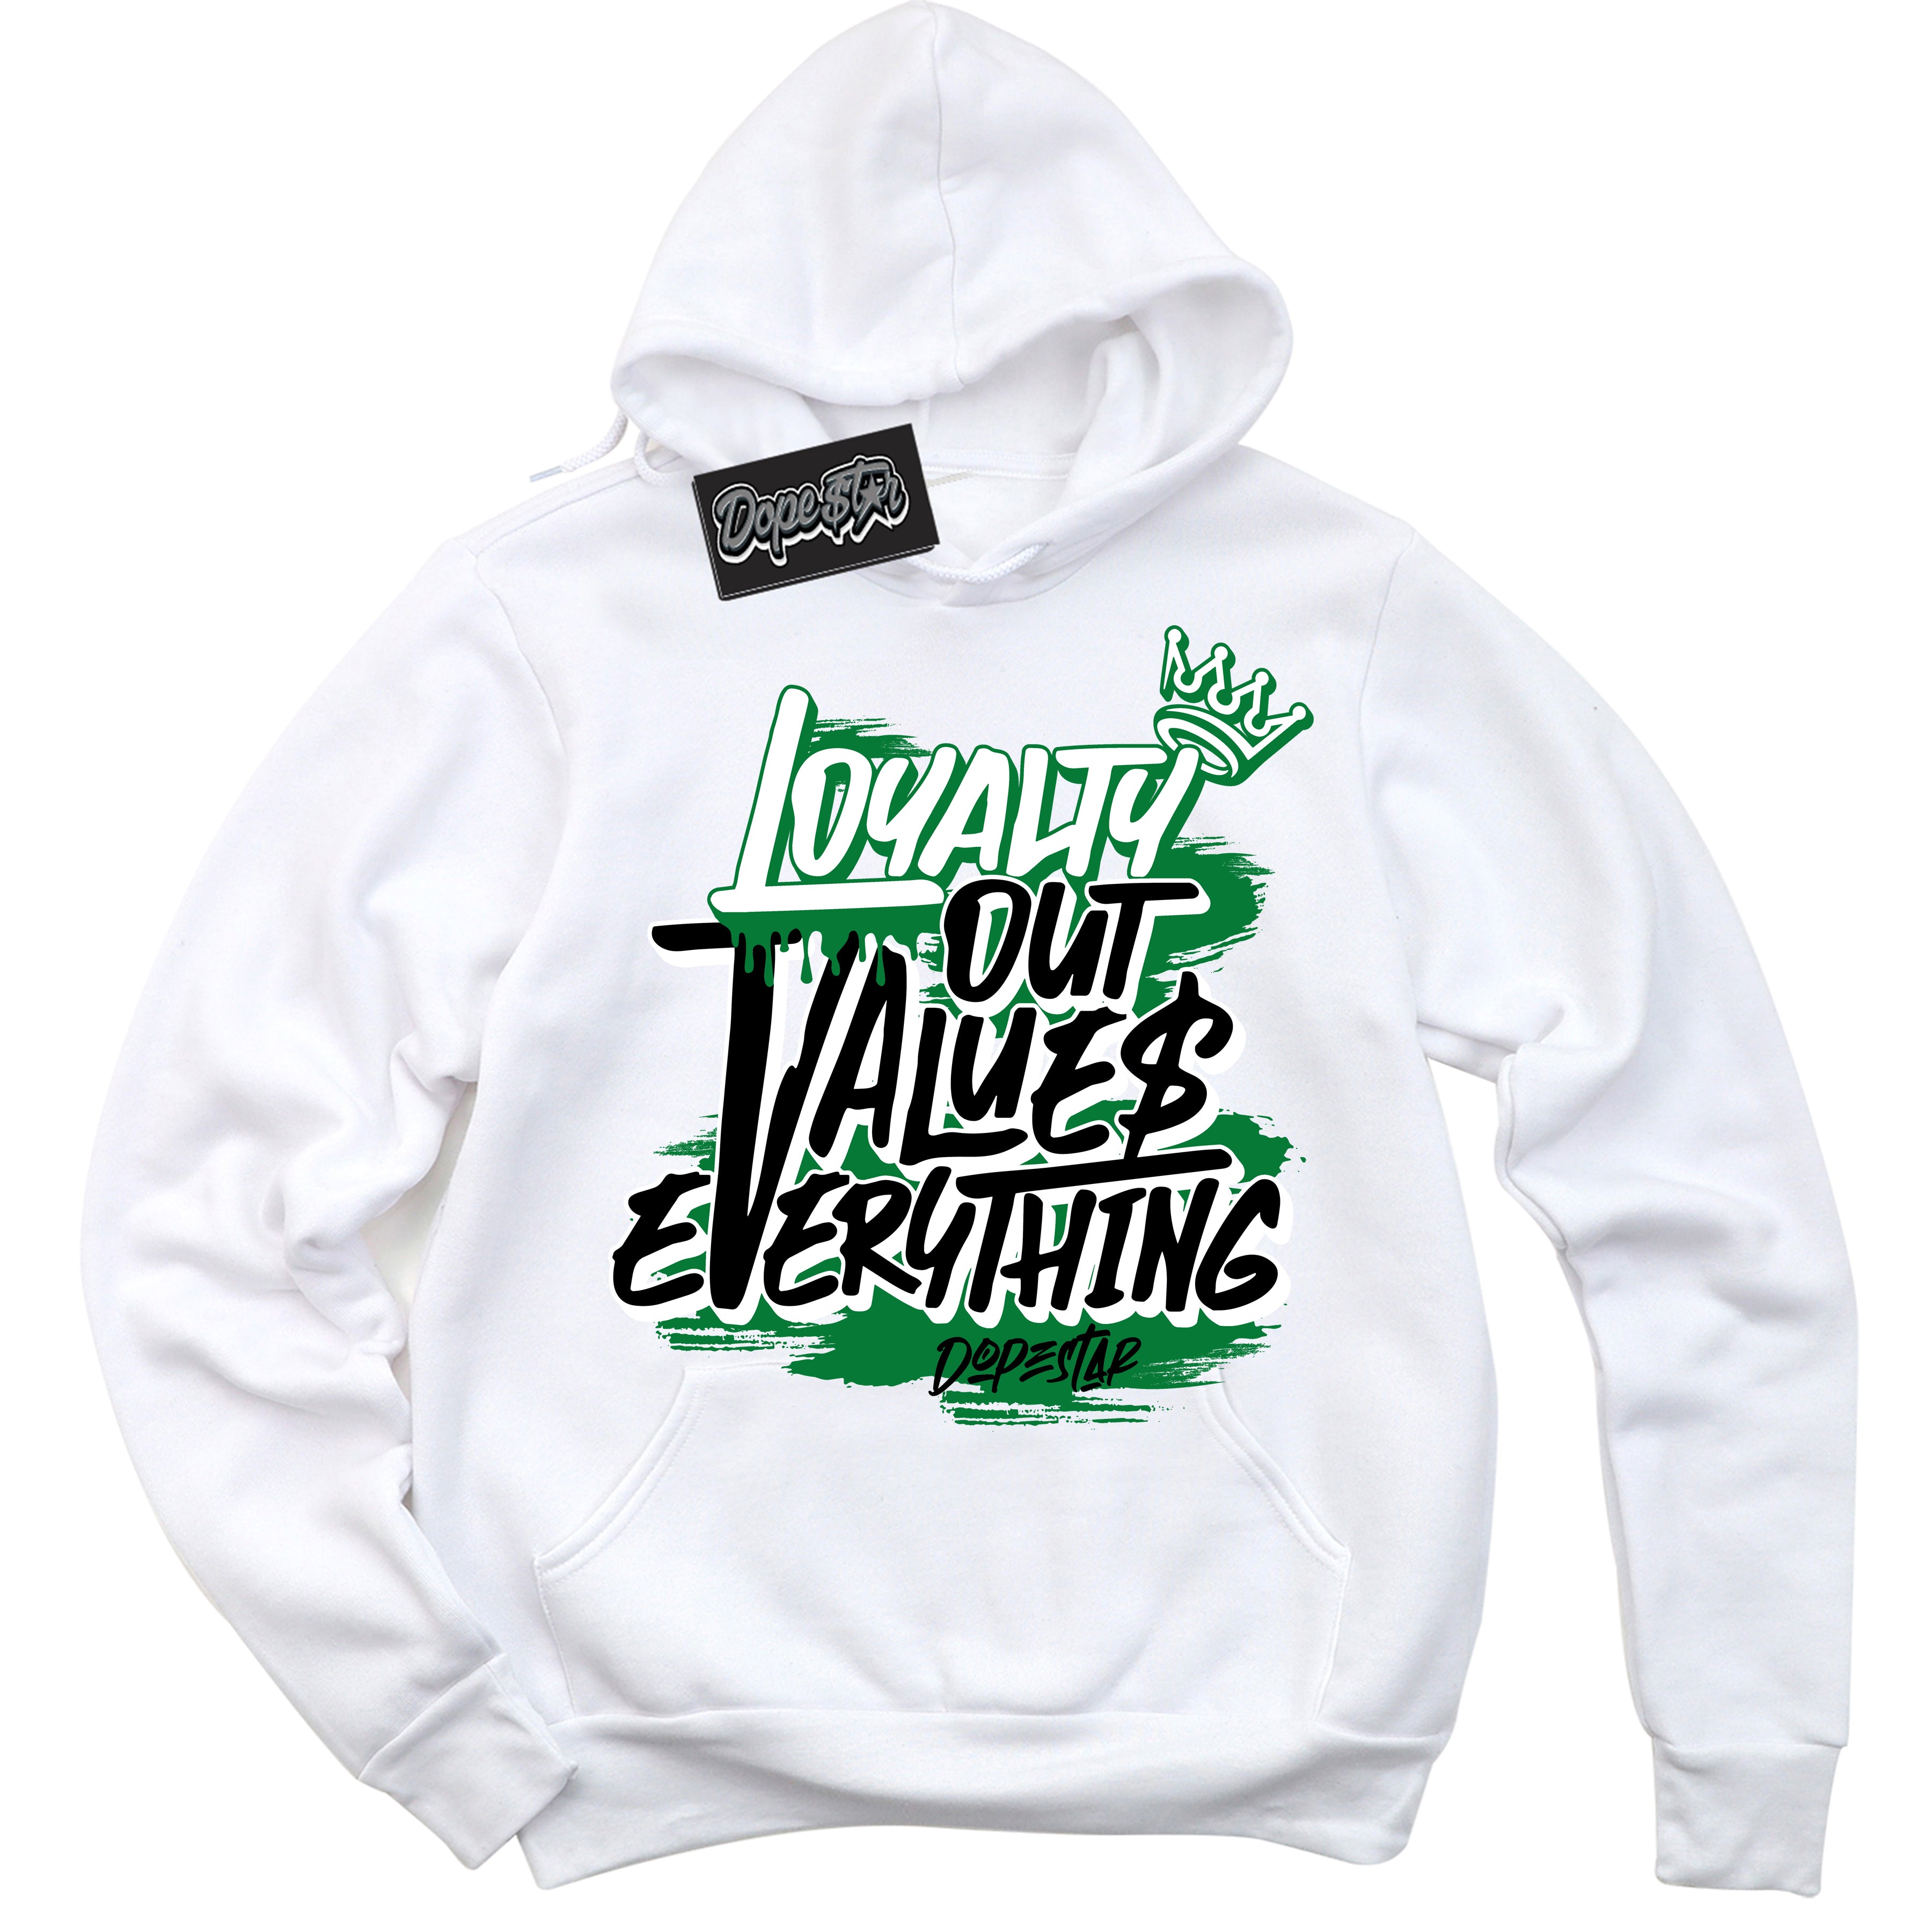 Cool White Hoodie with “ Loyalty Out Values Everything ”  design that Perfectly Matches Rings Lucky Green 6s Sneakers.